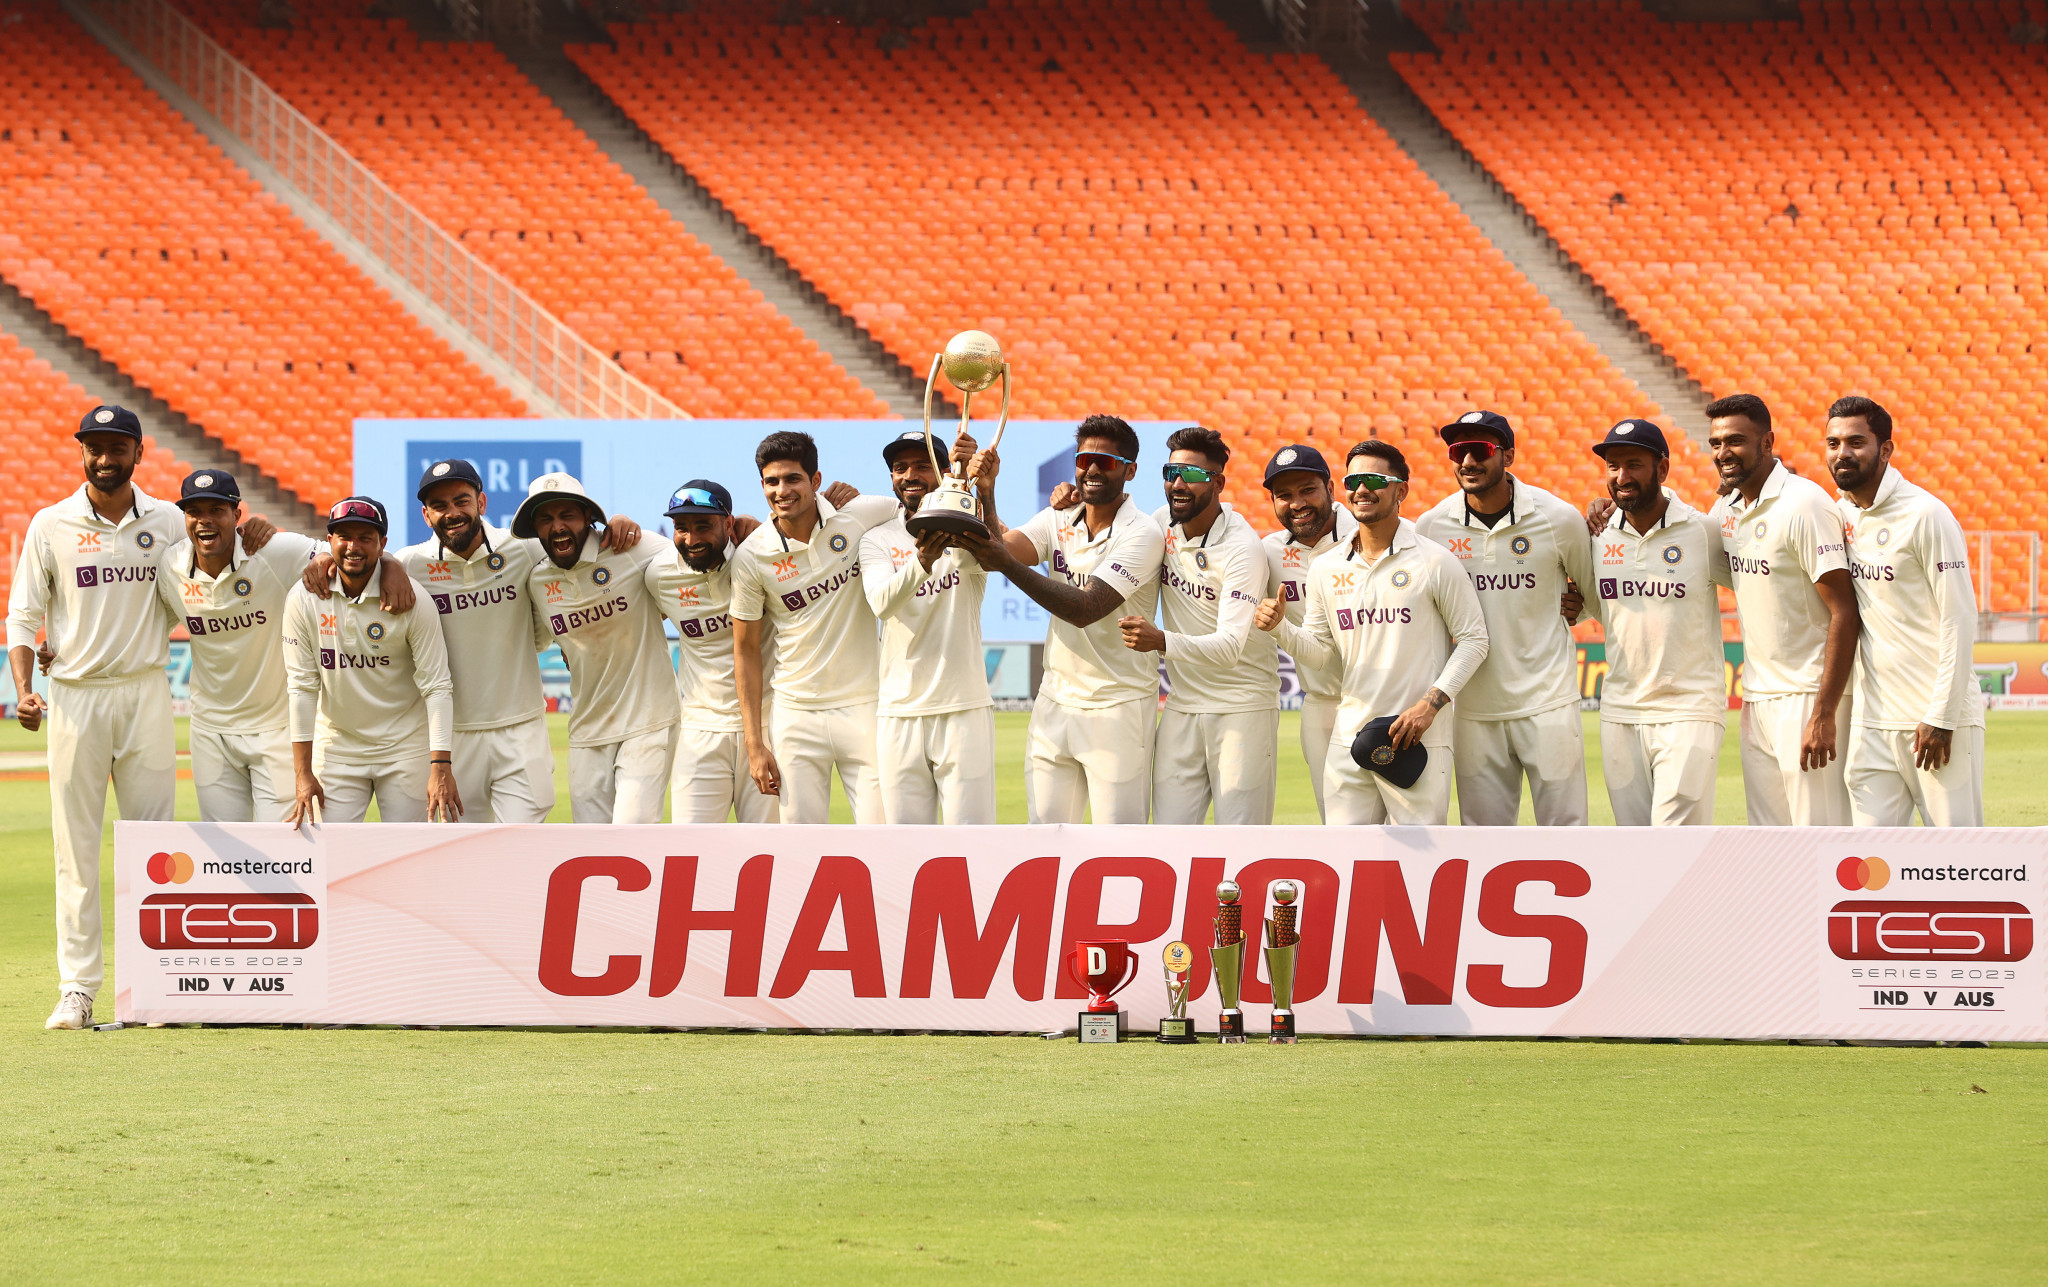 India beat Australia in February to lift the Border-Gavaskar Trophy ©Getty Images